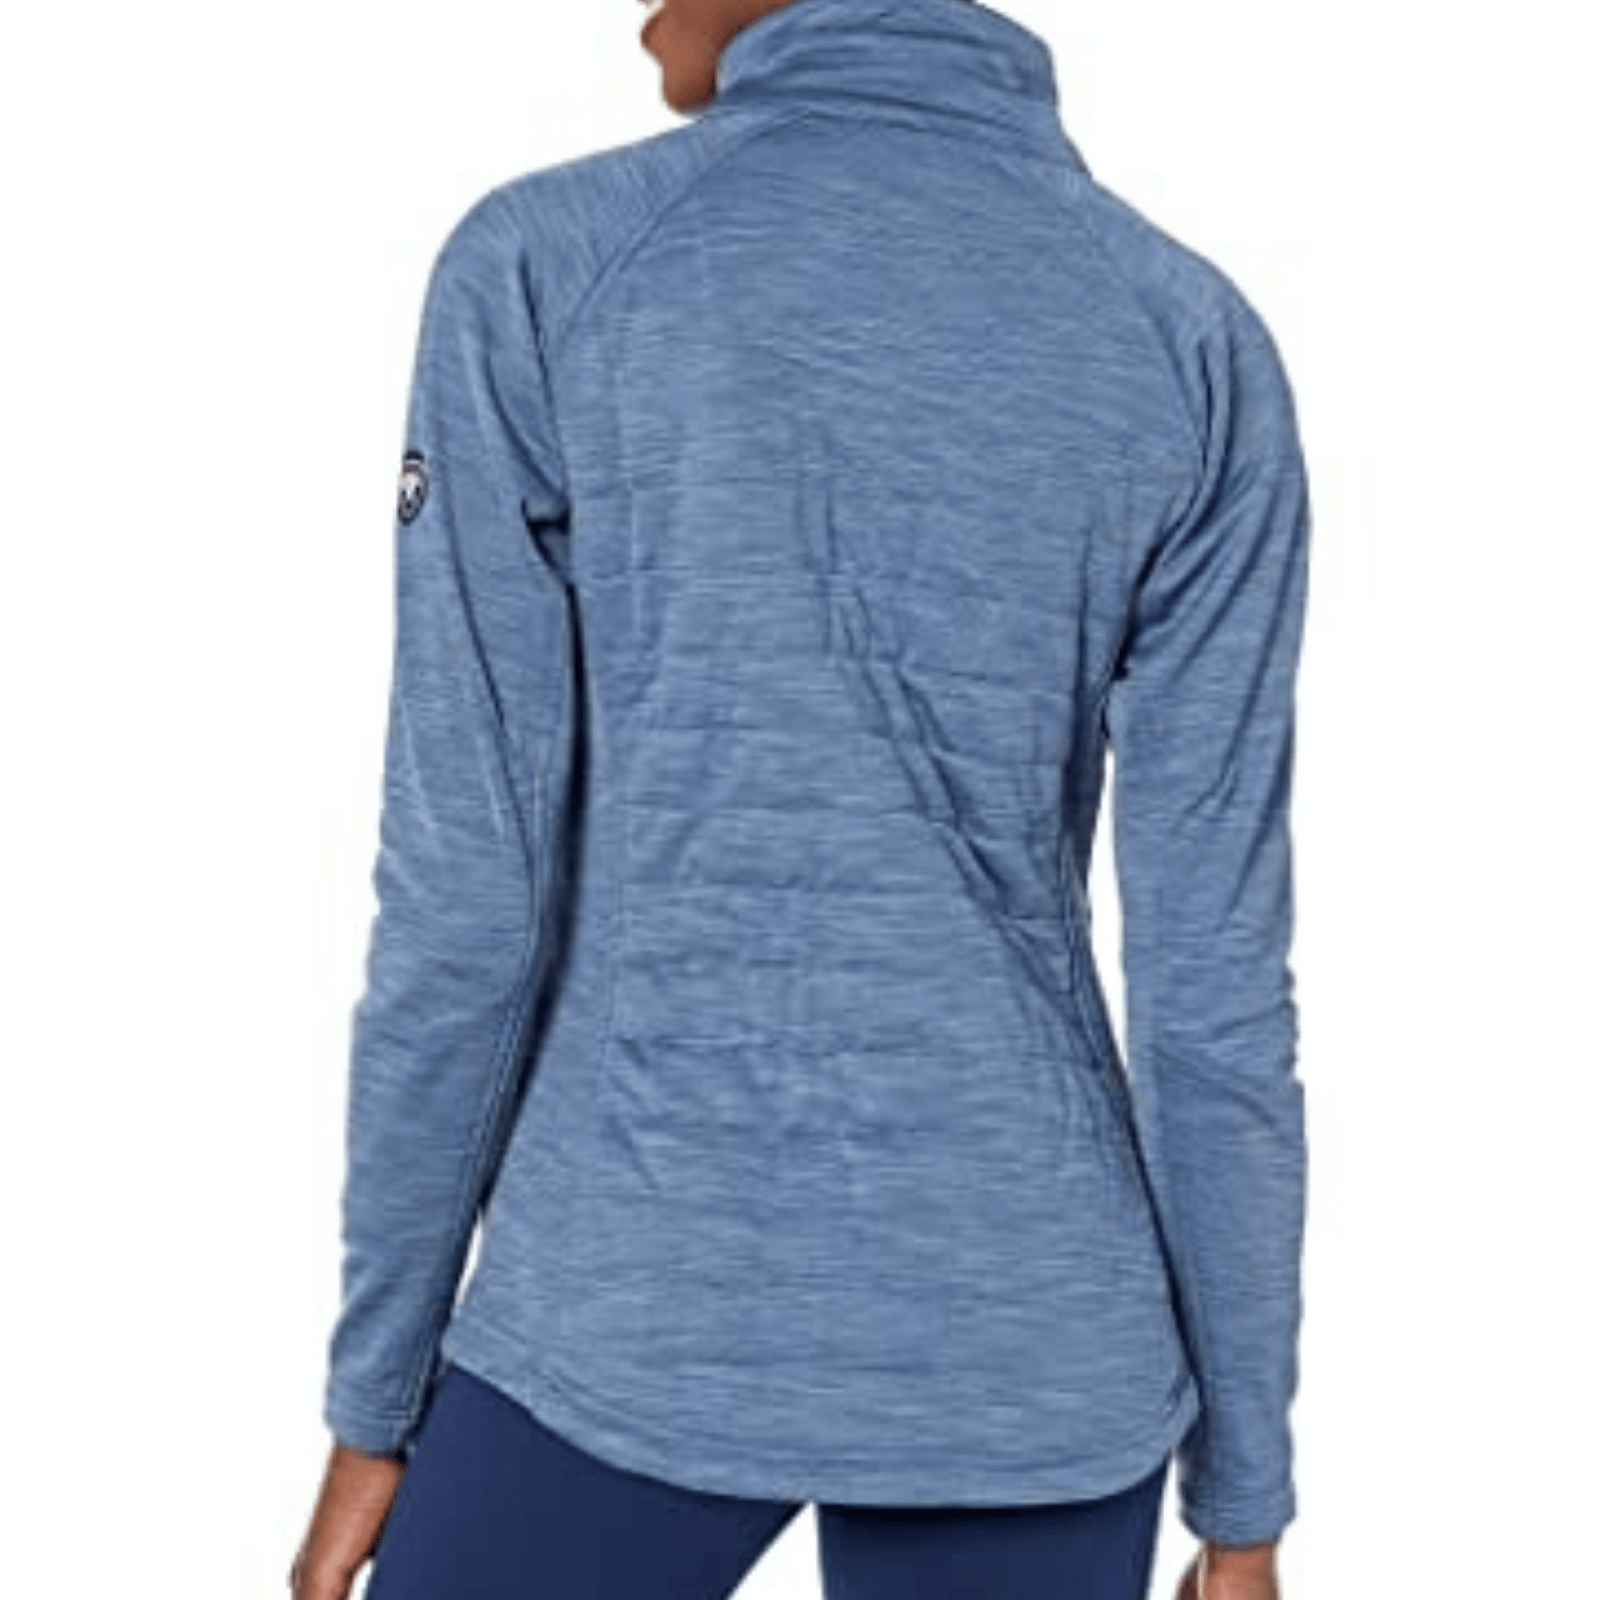 Ariat Womens Vanquish Full Zip Top- BLUE - Stylish Outback Clothing